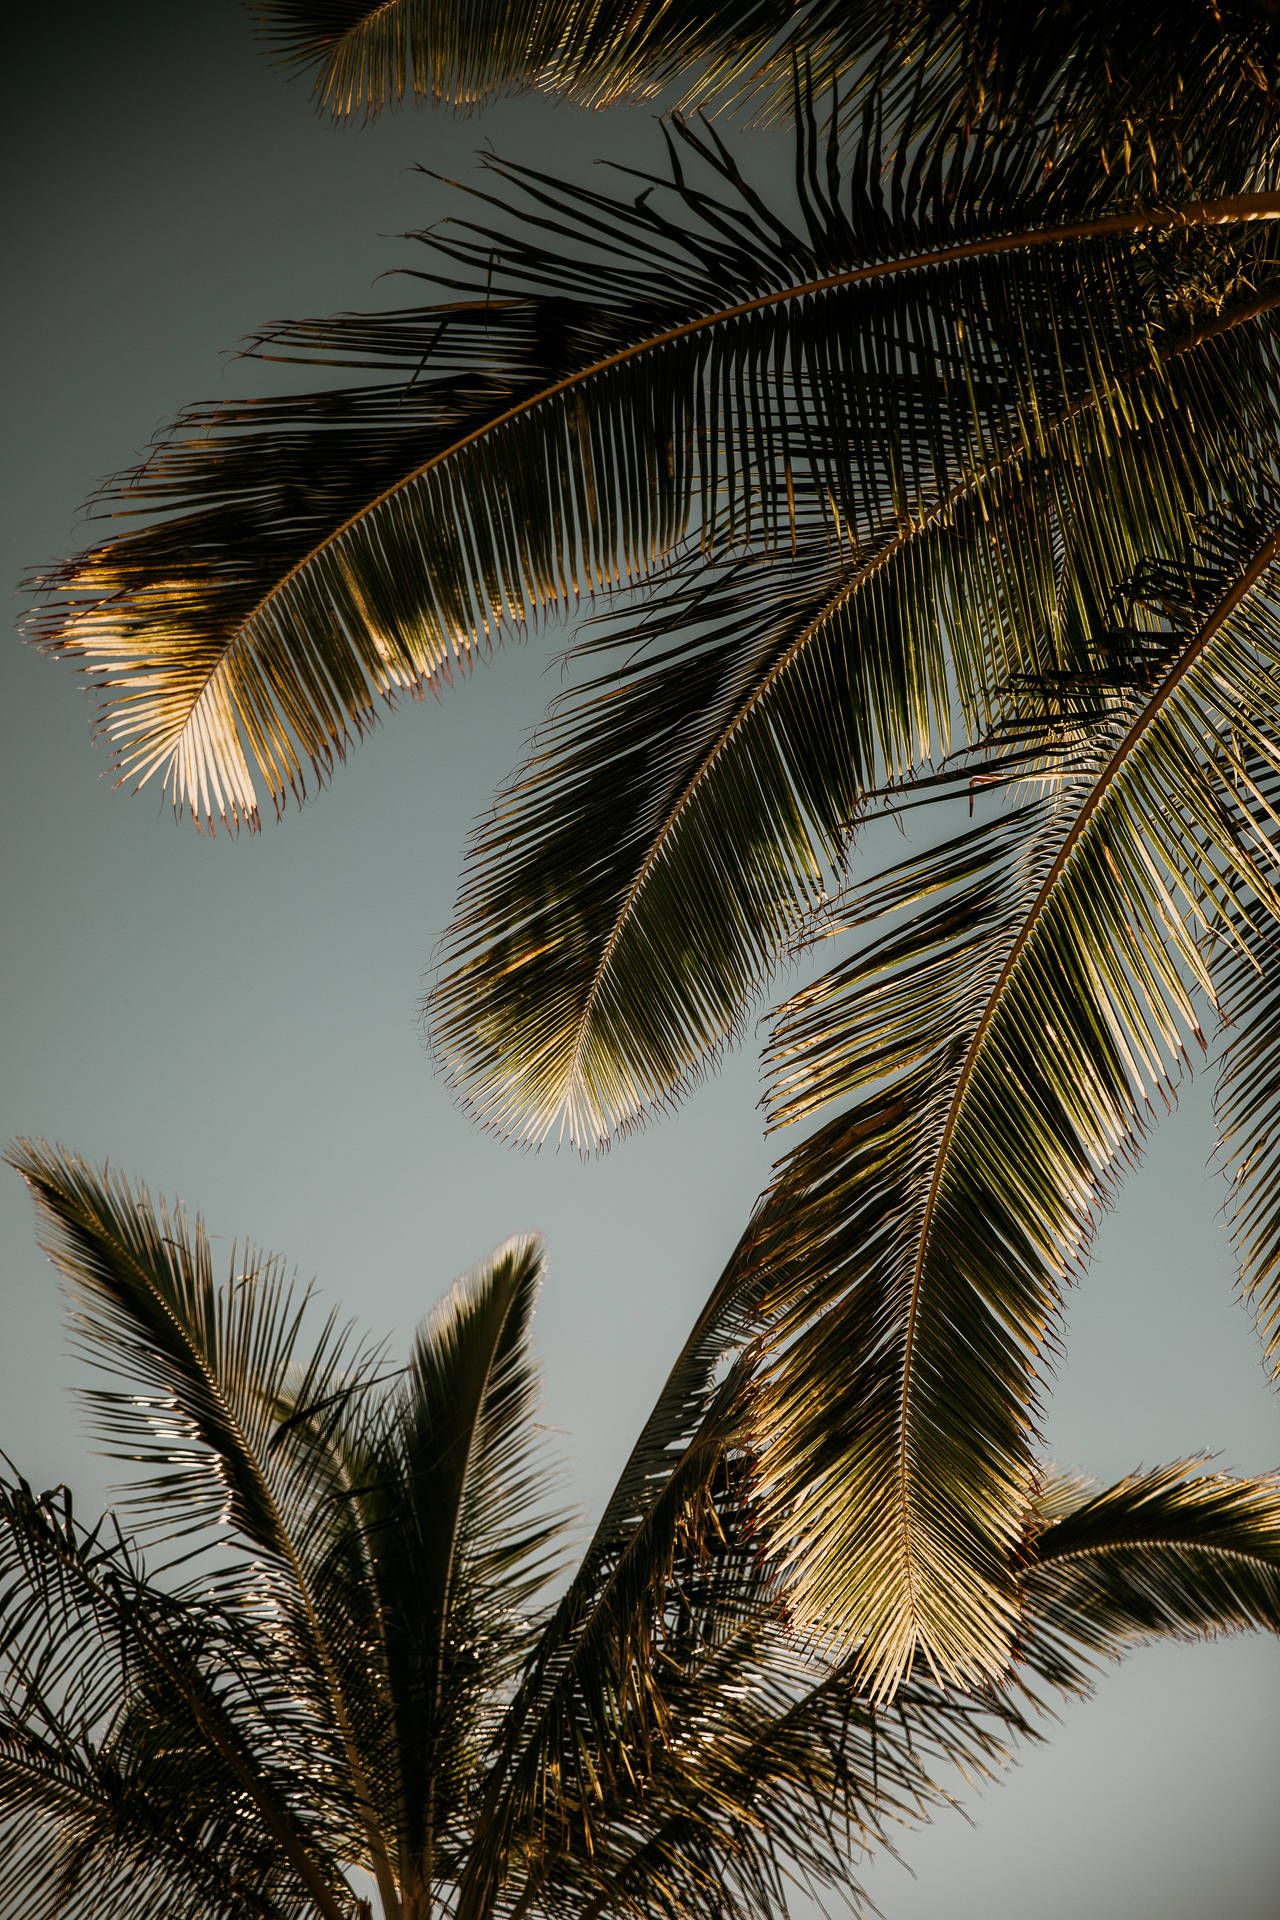 A palm tree with leaves and branches - Palm tree